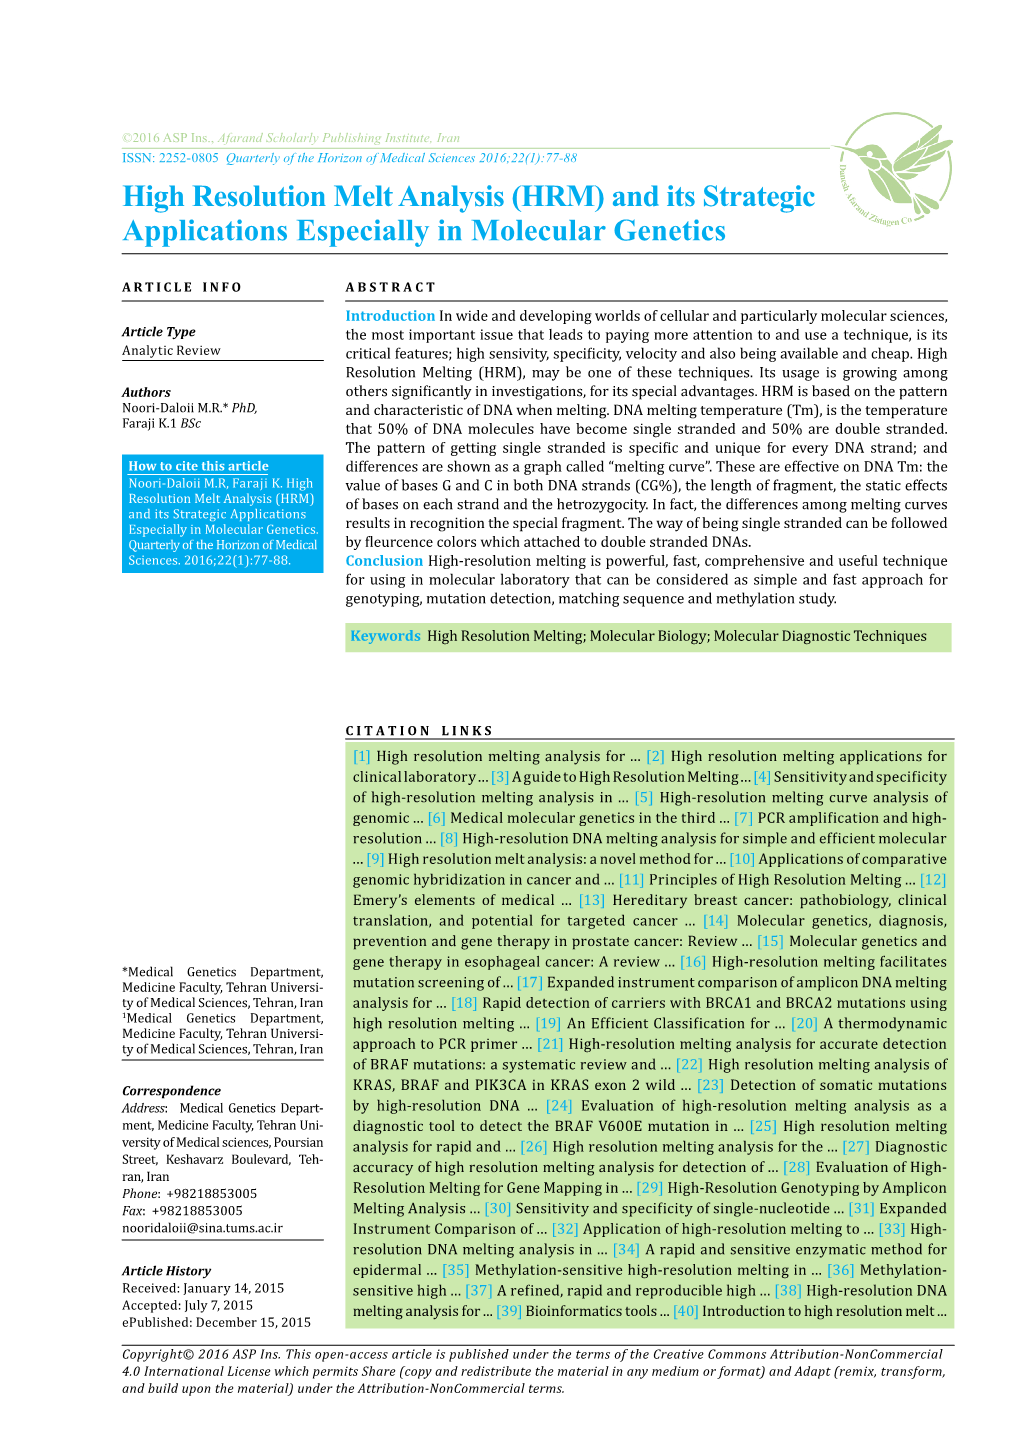 High Resolution Melt Analysis (HRM) and Its Strategic Applications Especially in Molecular Genetics